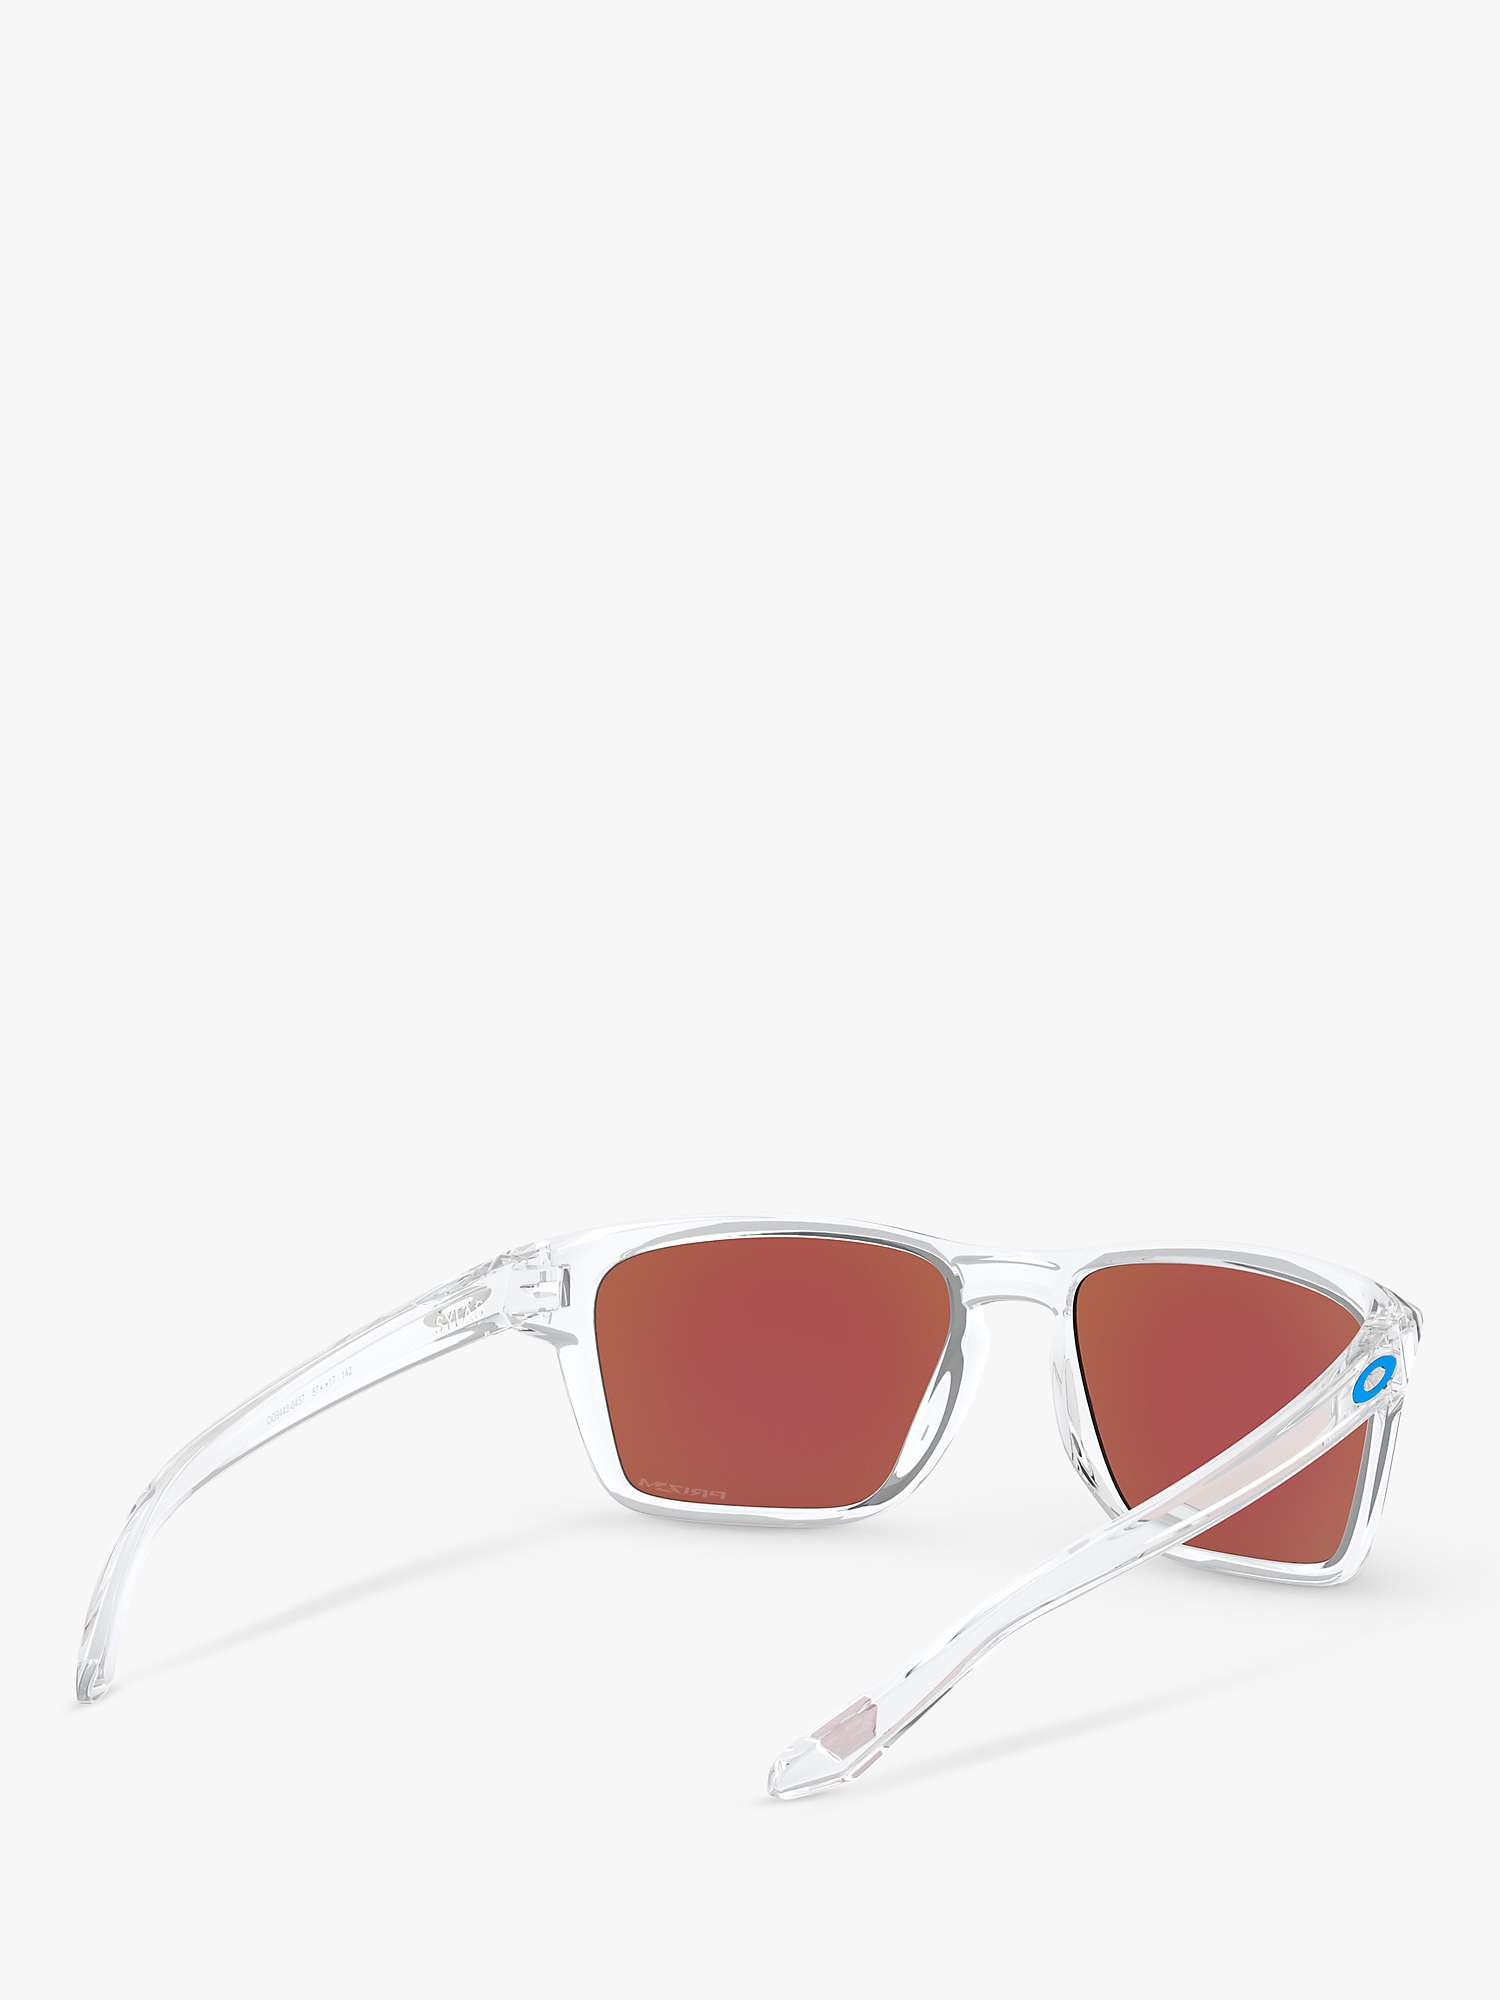 Buy Oakley OO9448 Men's Sylas Rectangular Sunglasses, Polished Clear/Mirror Blue Online at johnlewis.com